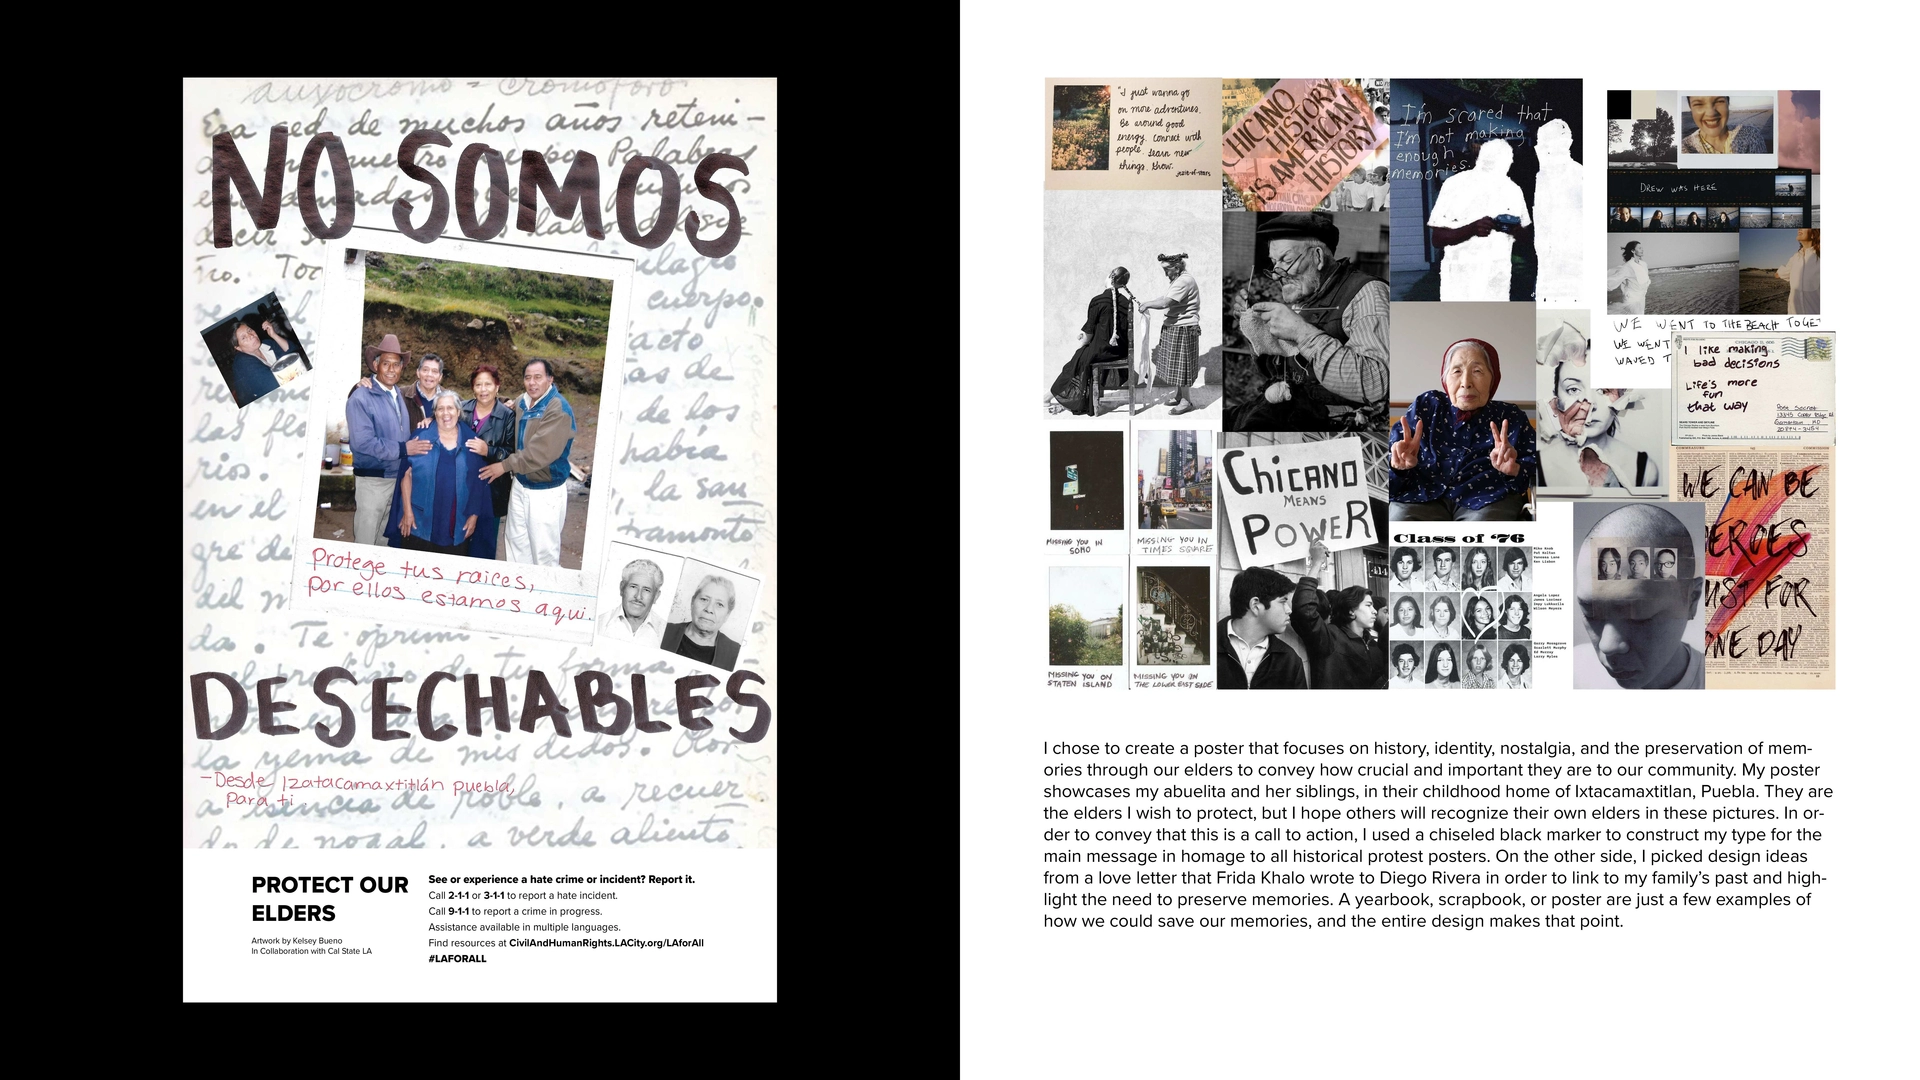 Writings as background with a photo of family in the middle and big words "No Somos Desechables"